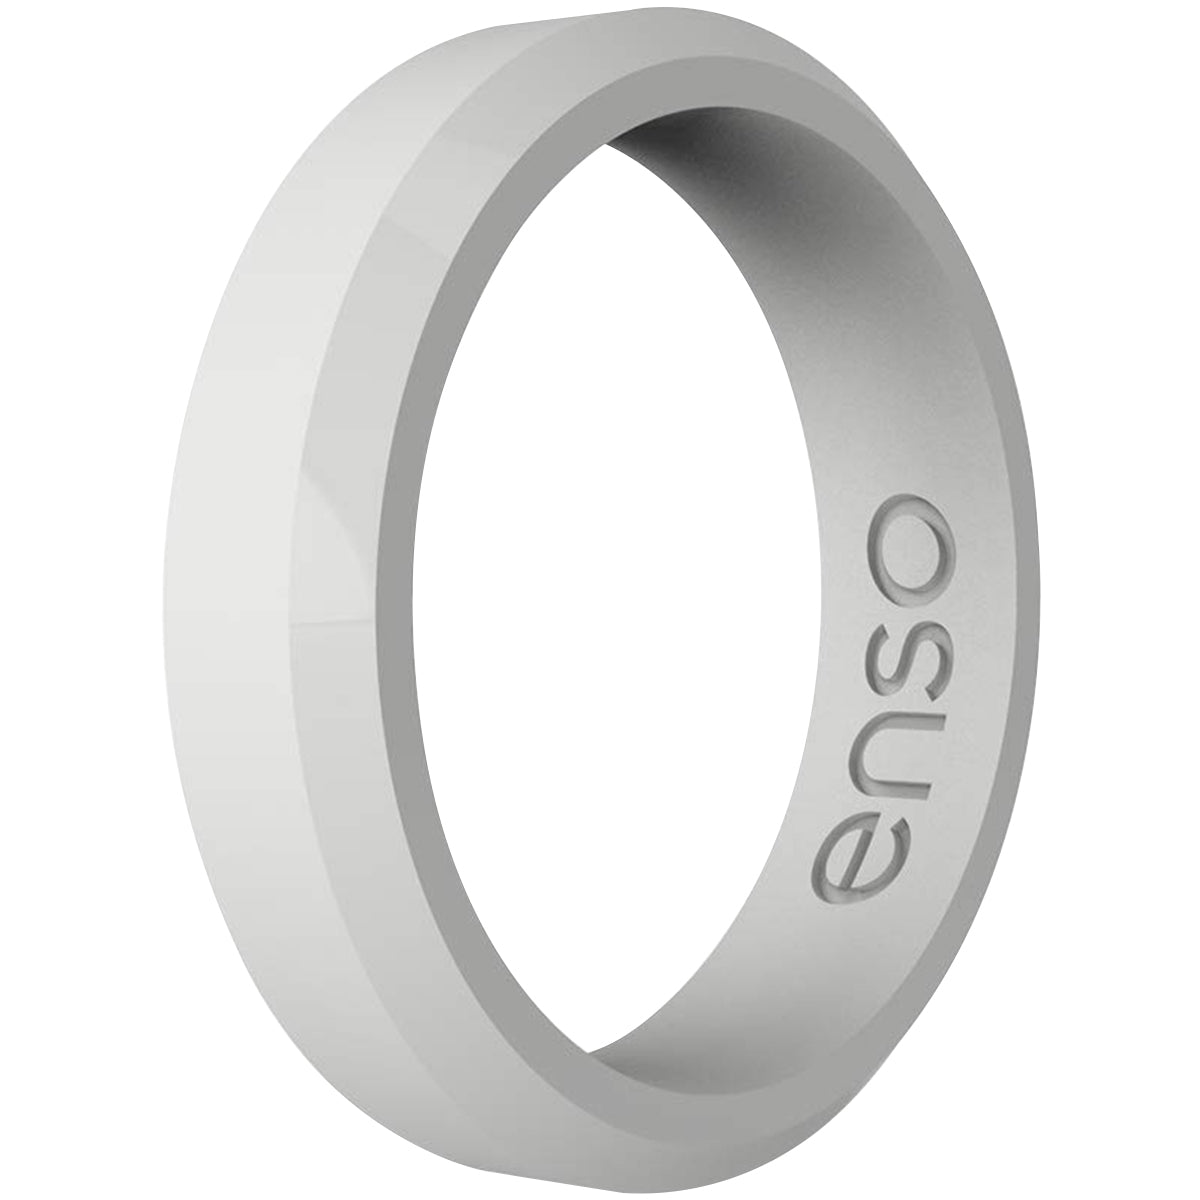 Enso Rings Thin Bevel Series Silicone Ring - Misty Grey Enso Rings